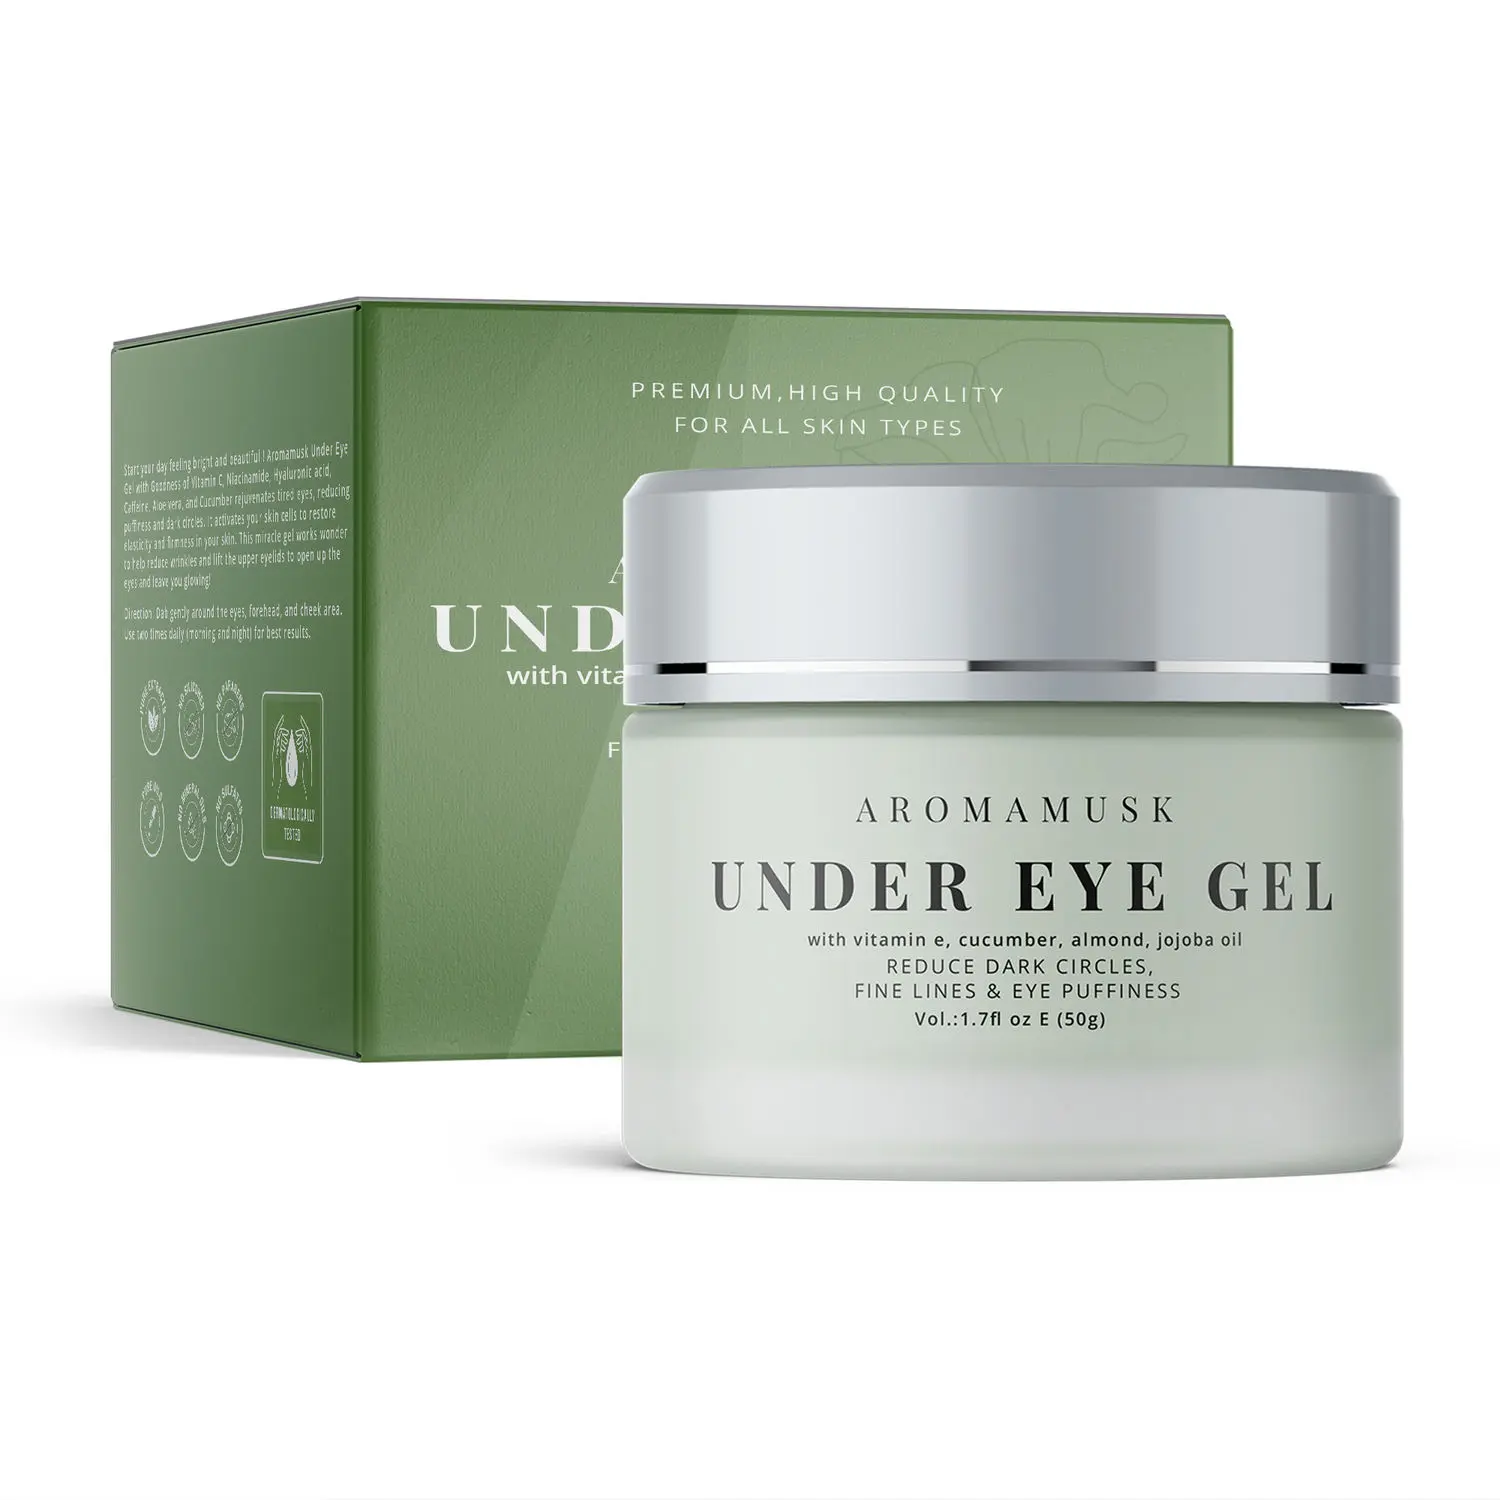 AromaMusk Under Eye Gel For Puffy Eyes, Dark Circles, Wrinkles & Fine Lines With Vitamin C, Cucumber, Niacinamide, Green Tea And Madonna Lily (50 g)